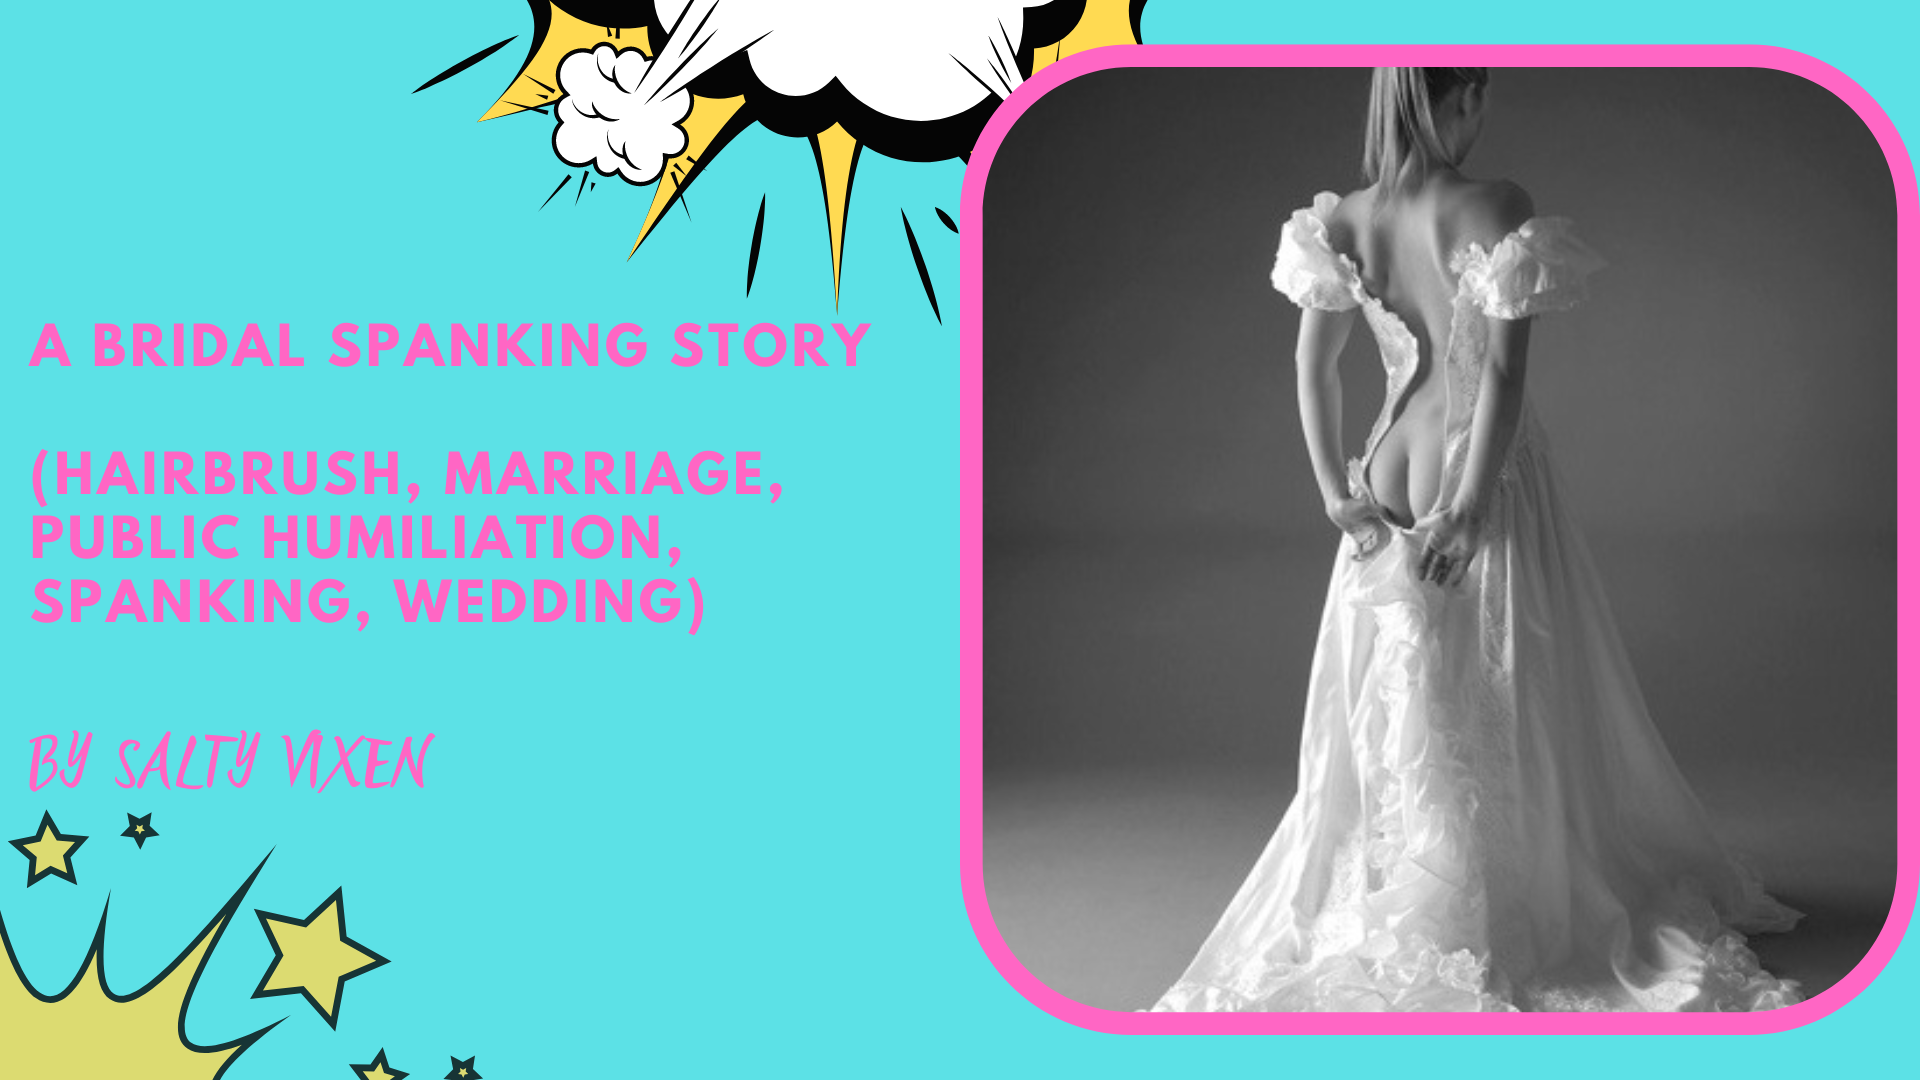 A Bridal Spanking Story (hairbrush, public humiliation, spanking) ~ Salty Vixen Stories and More picture